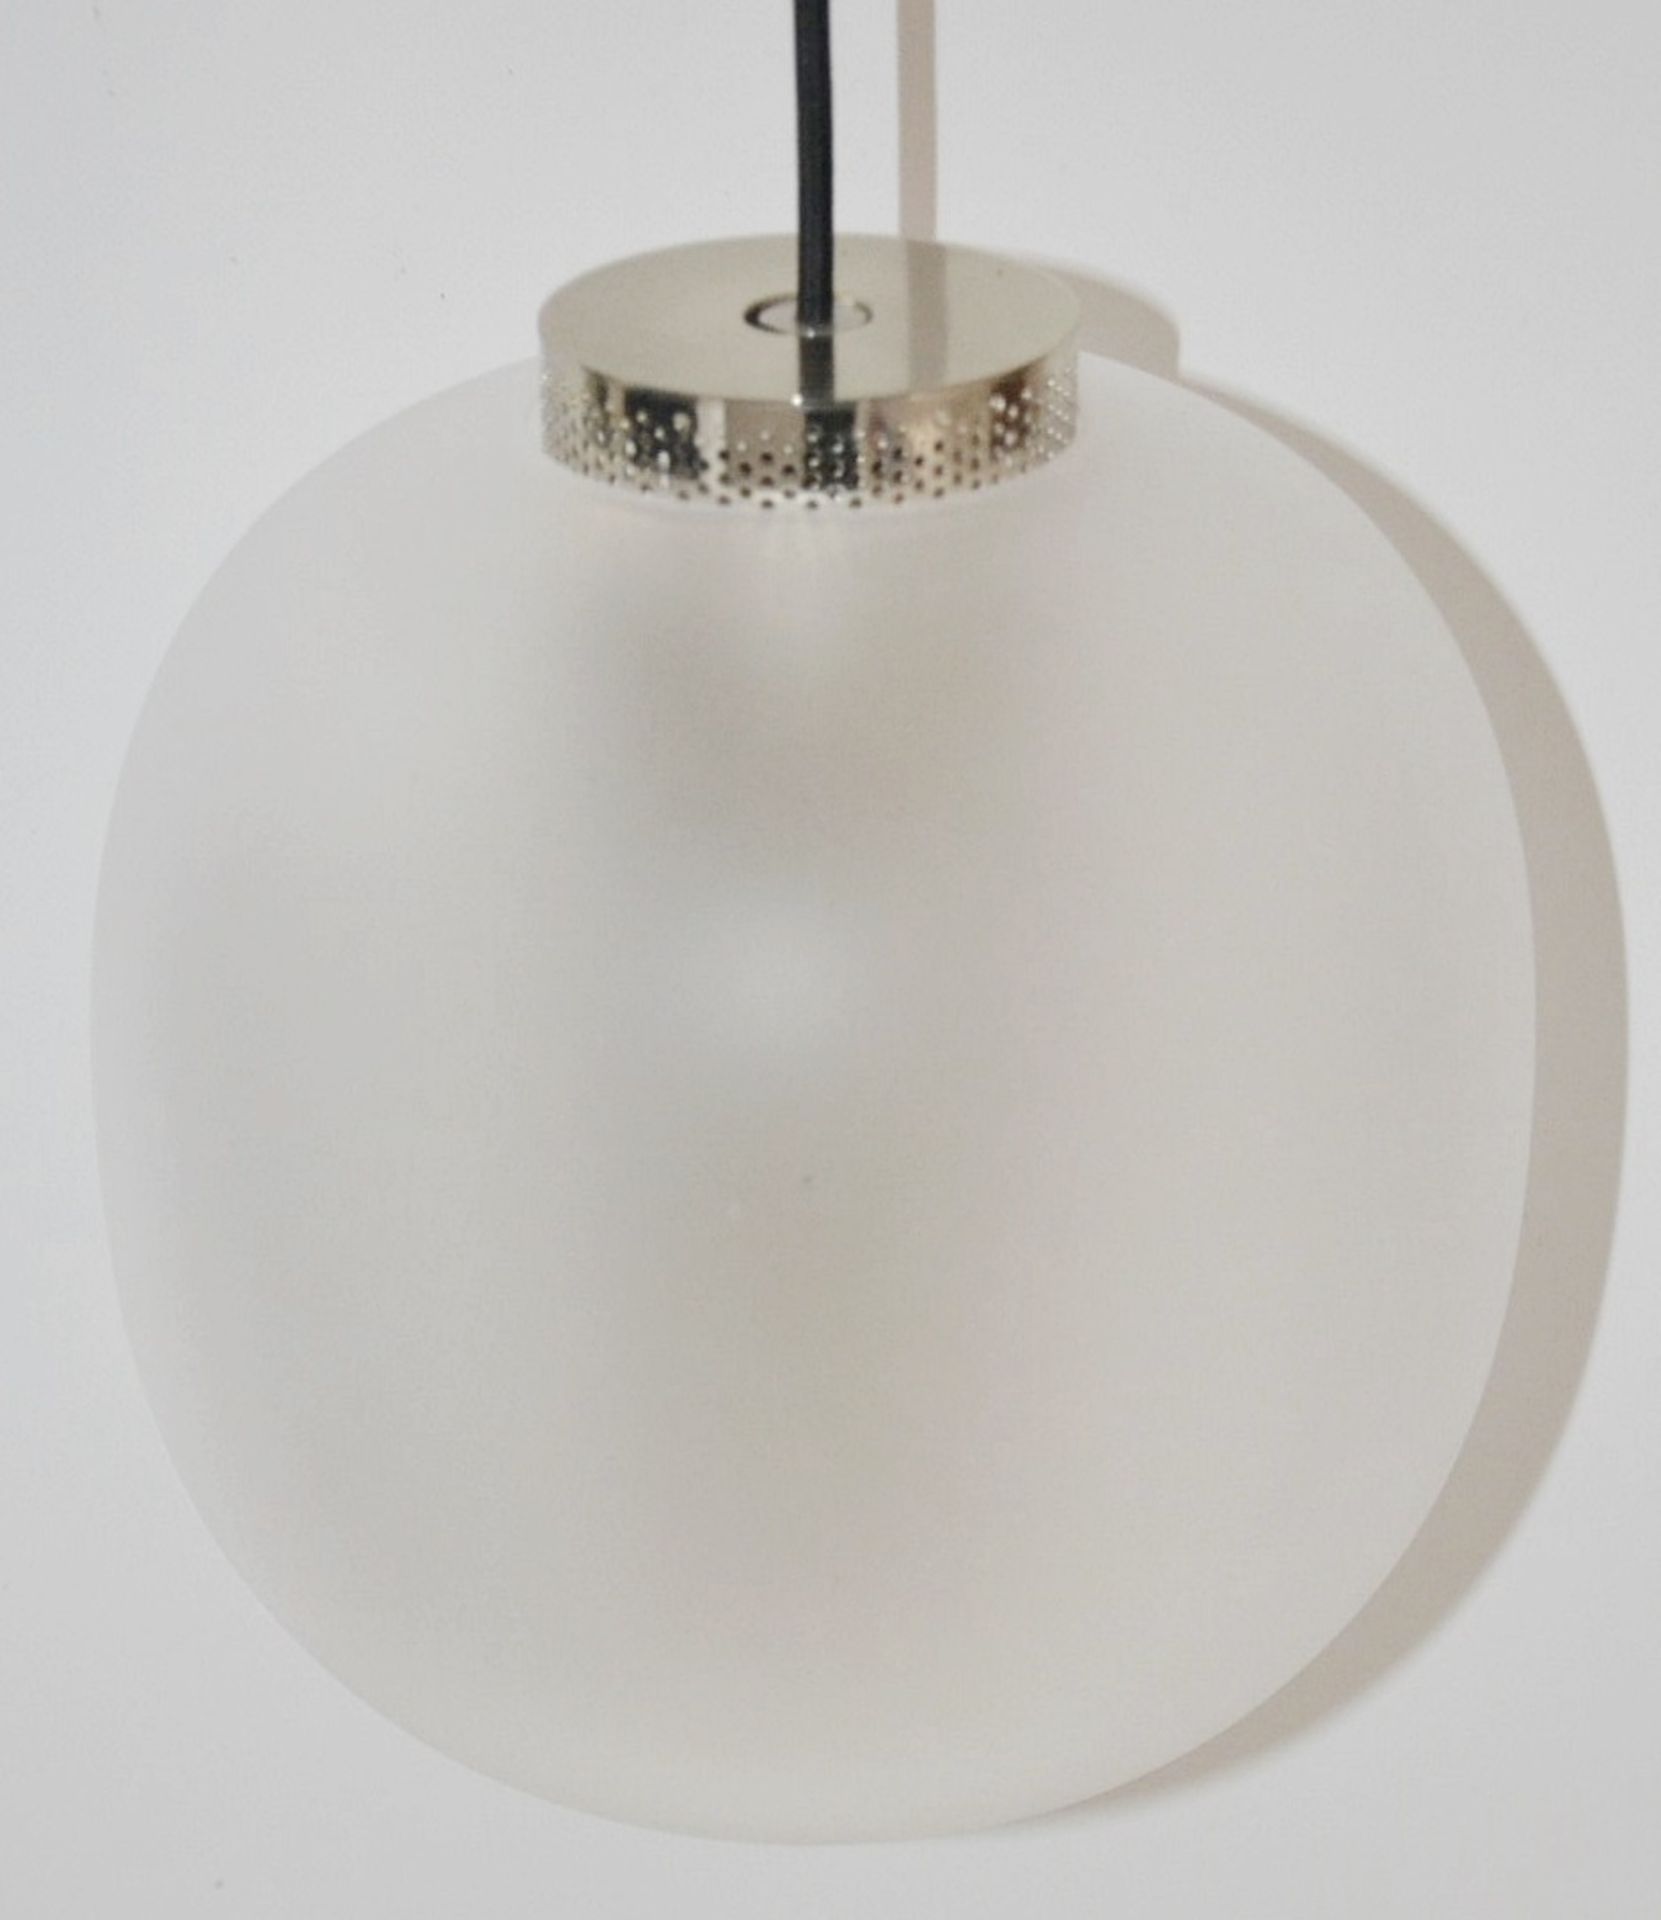 1 x 'Bloom' Pendant Light By Resident - Frosted White Glass - Original RRP £395.00 - Image 6 of 6